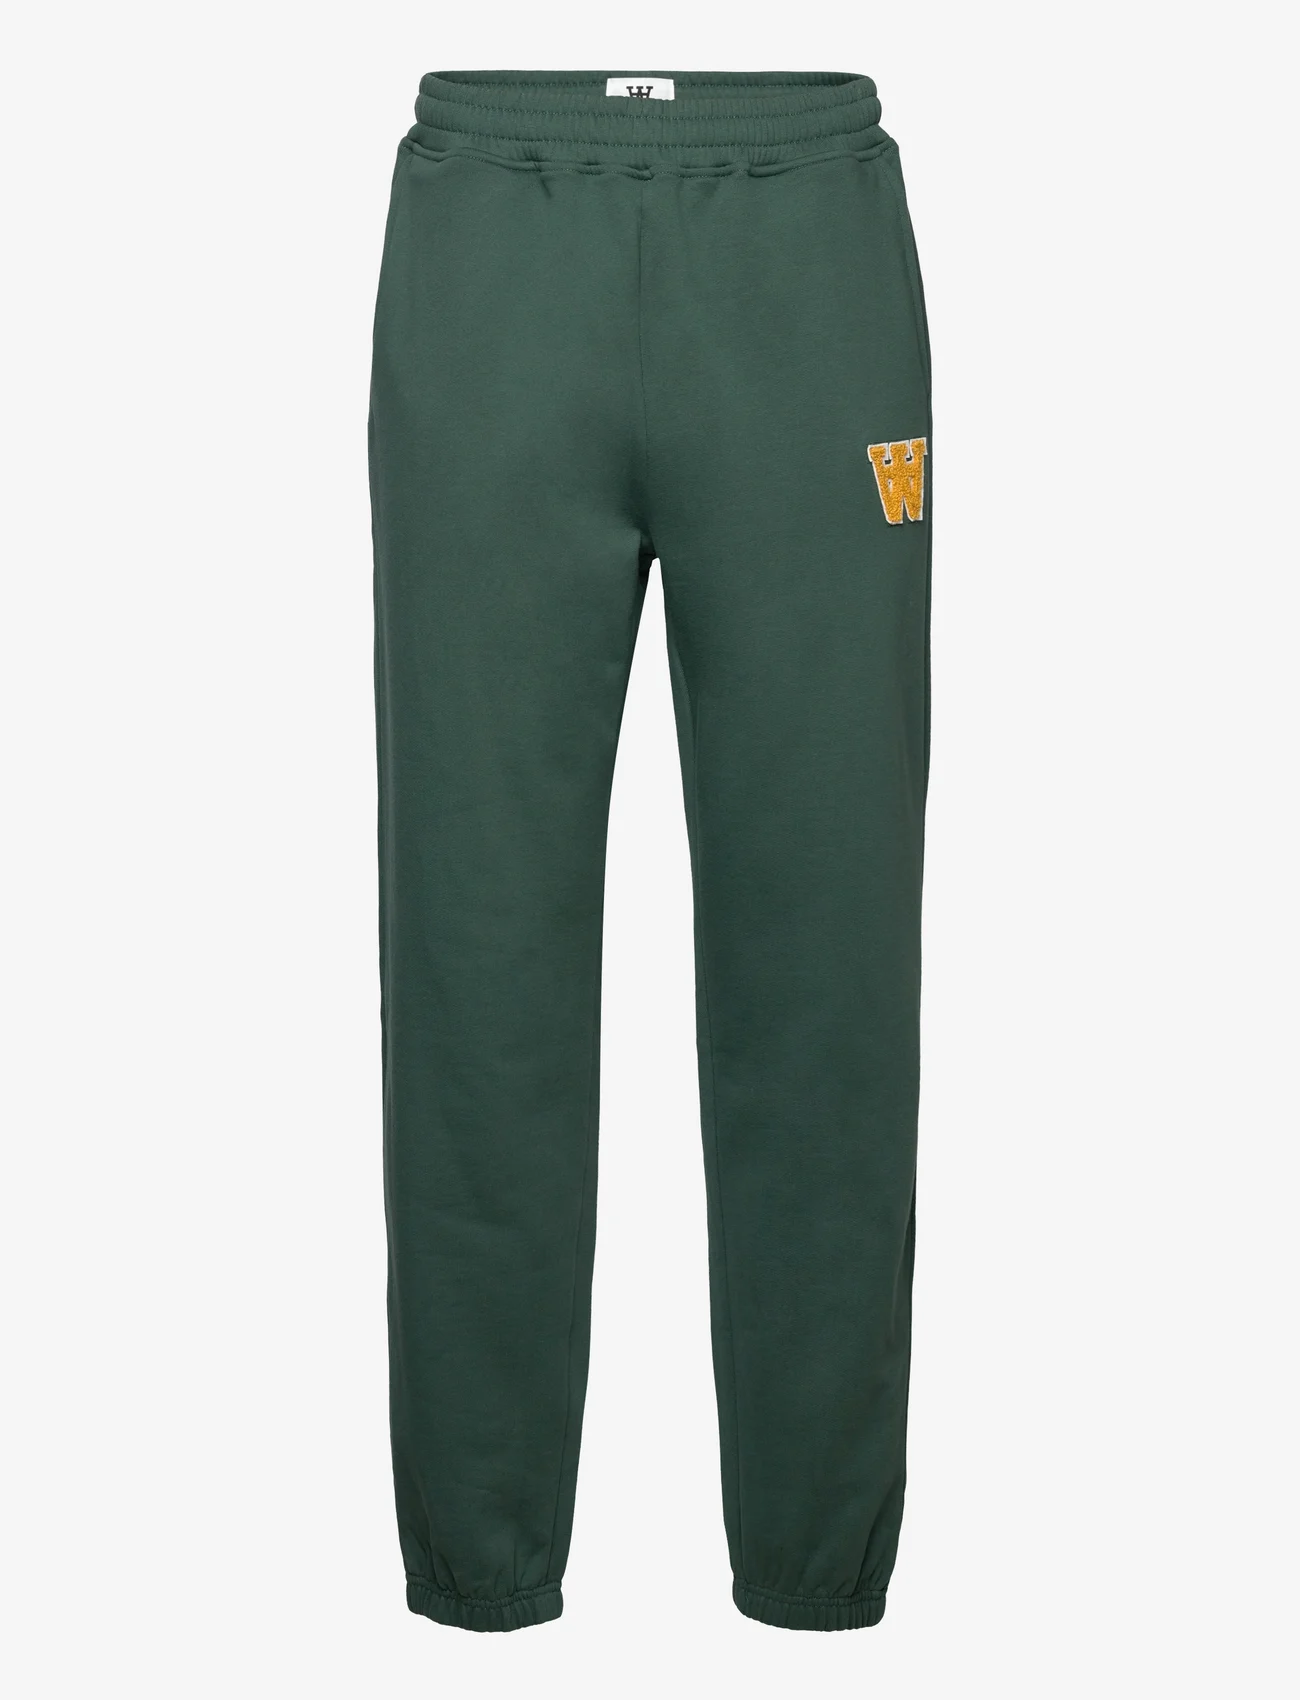 Double A by Wood Wood - Cal joggers - sweatpants - forest green - 0